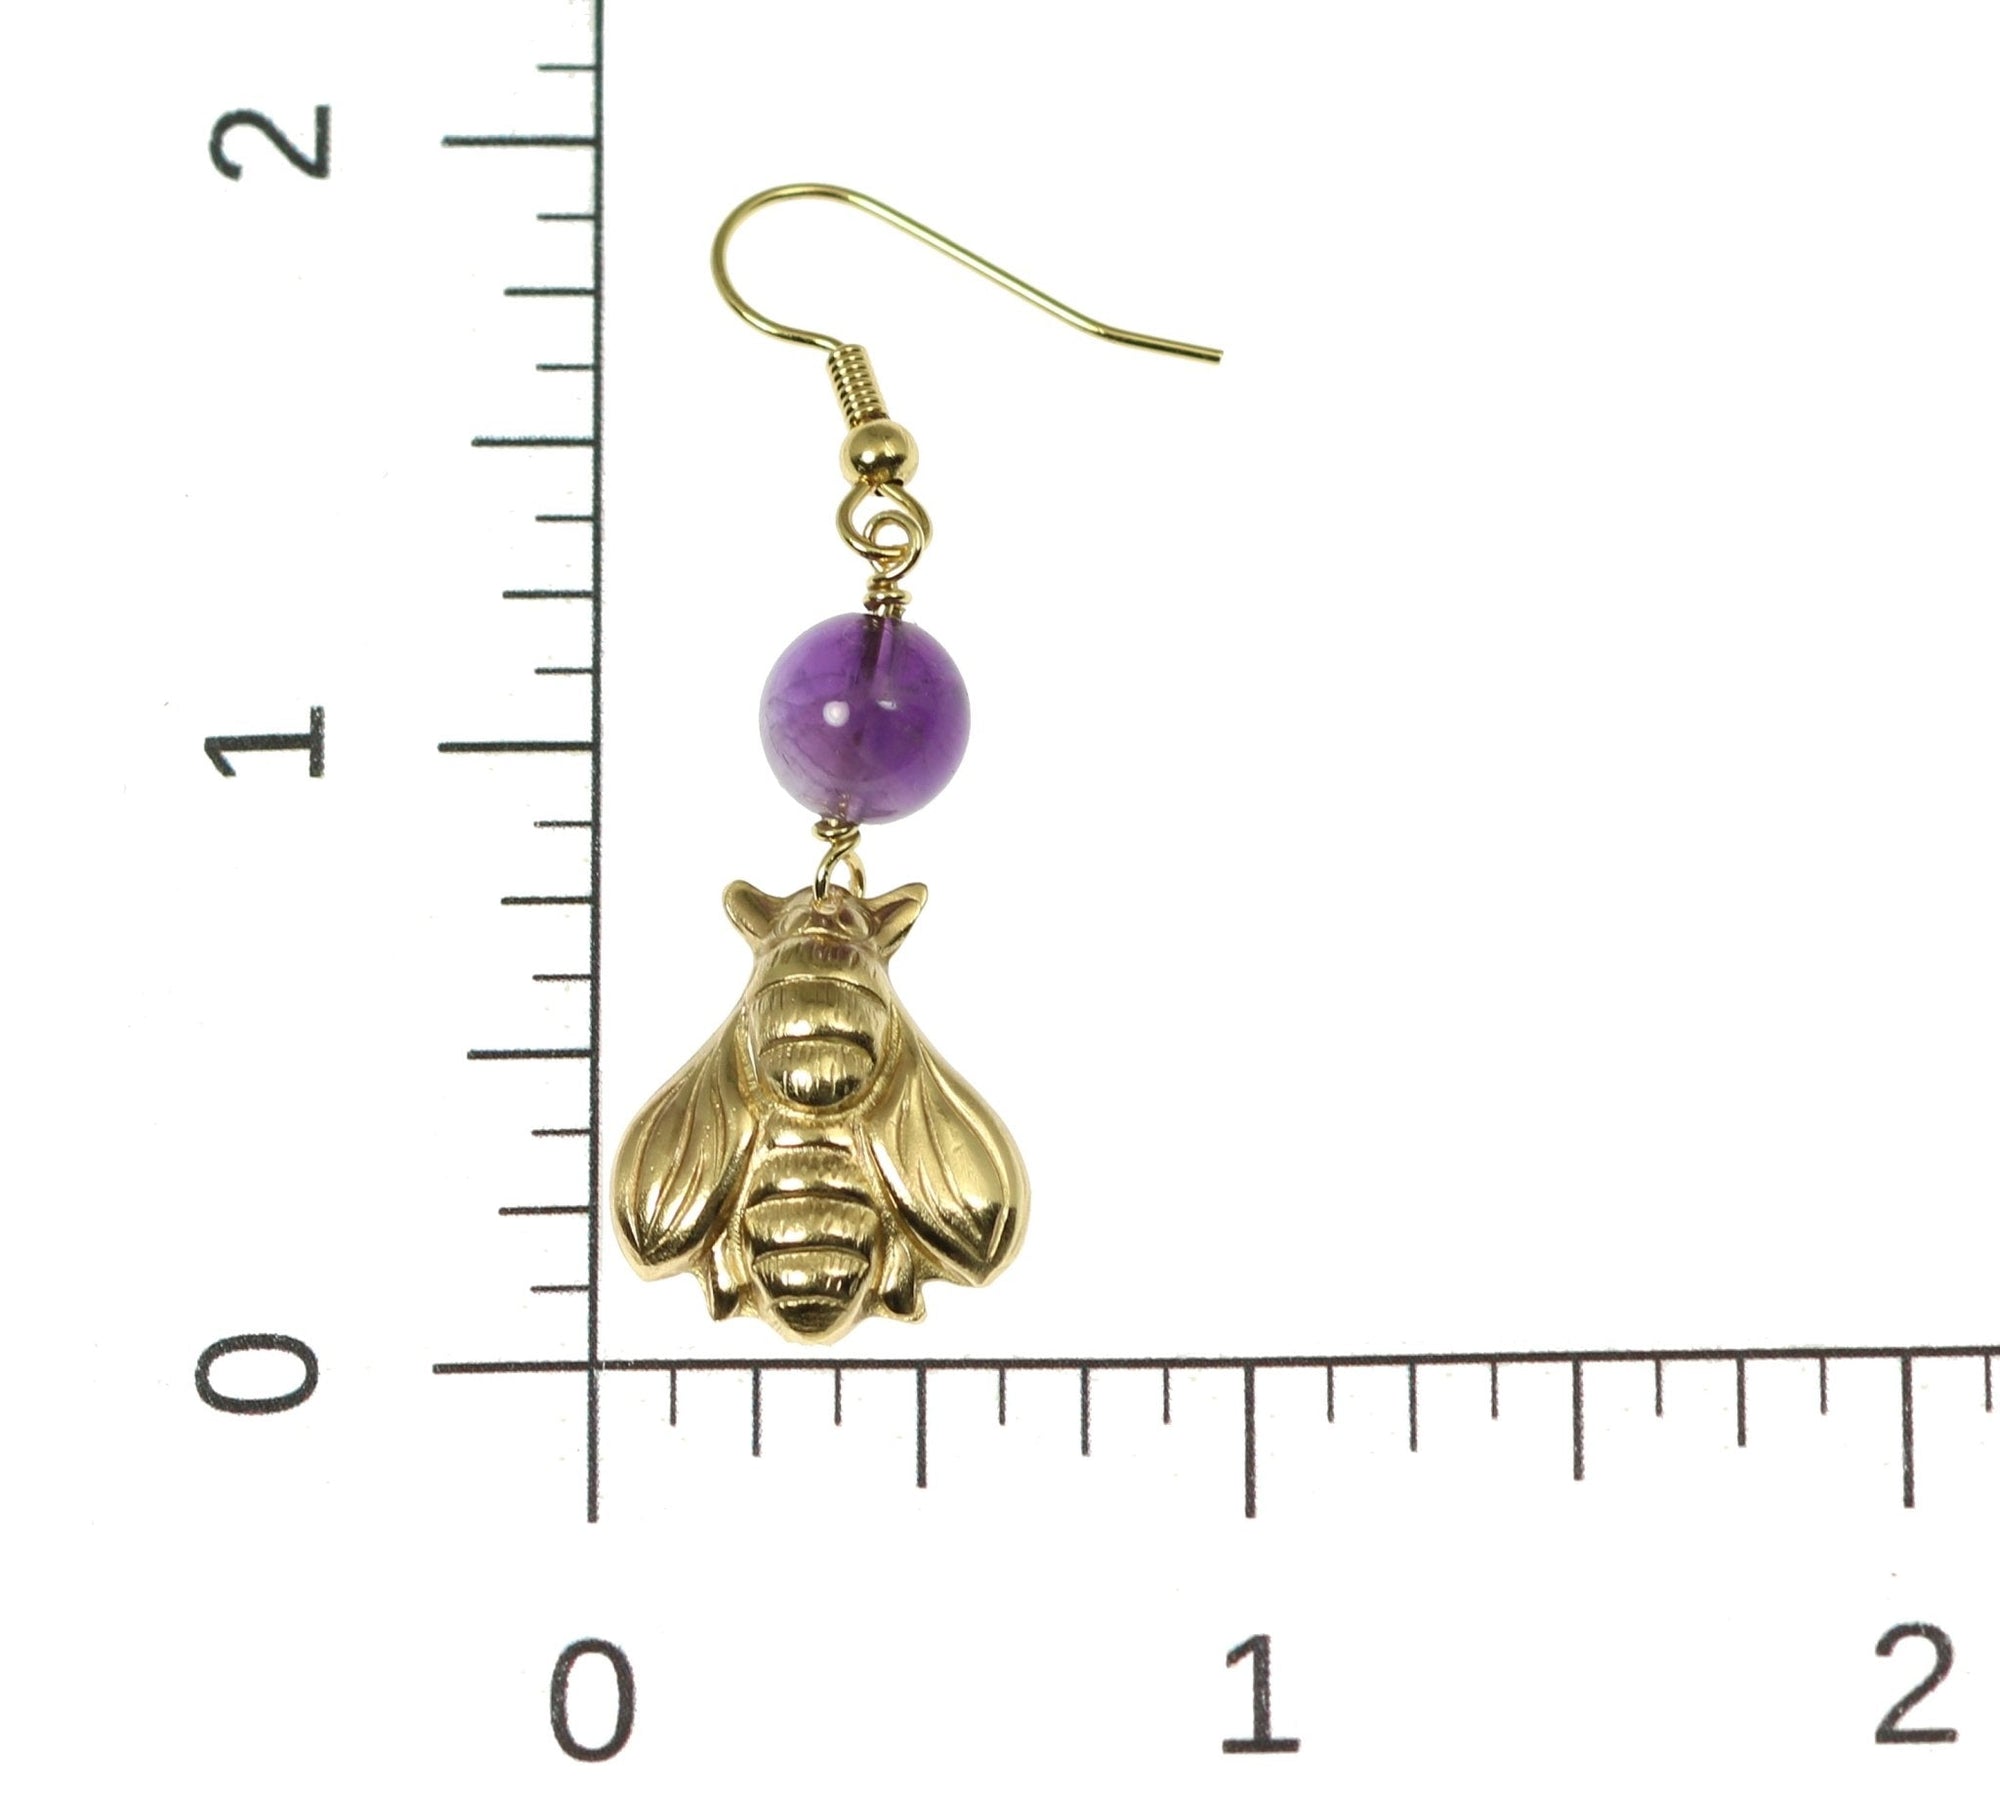 Scale of Nu Gold Honey Bee Earrings with Amethyst